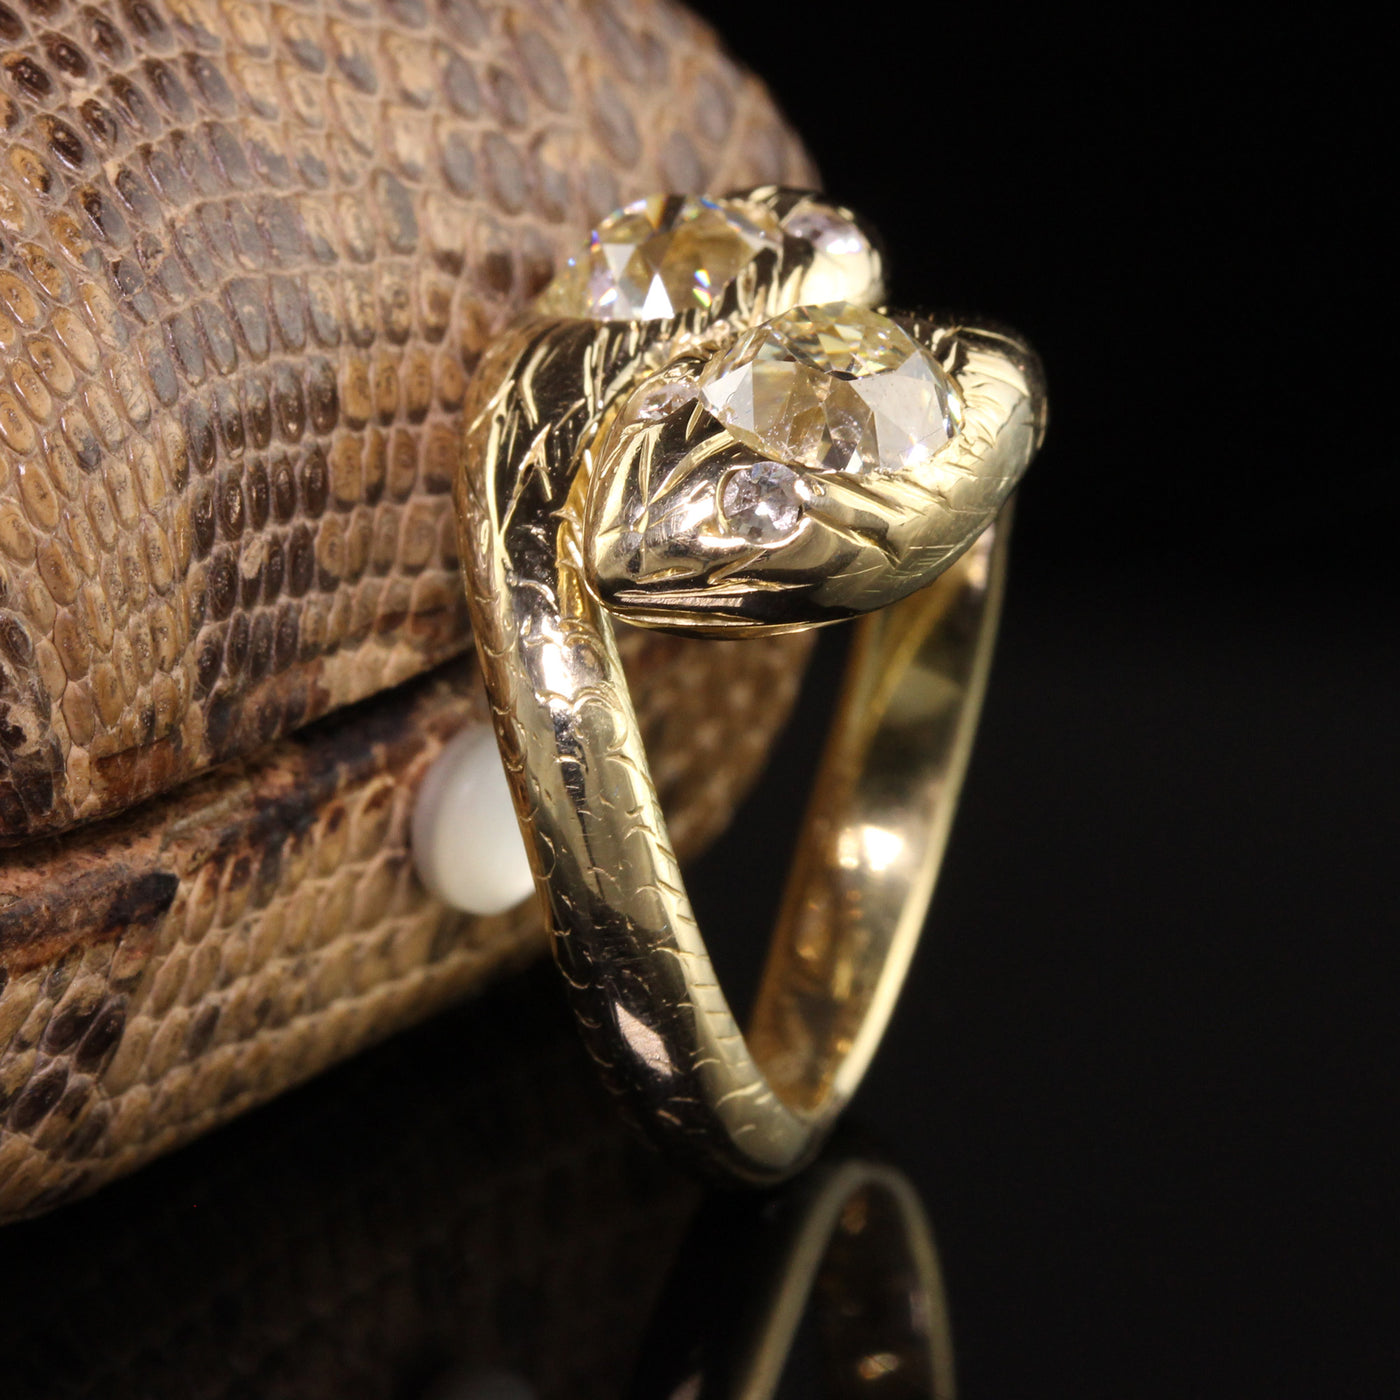 Snake Ring 001-231-00380 - Joint Venture Jewelry Cary NC | Joint Venture  Jewelry | Cary, NC